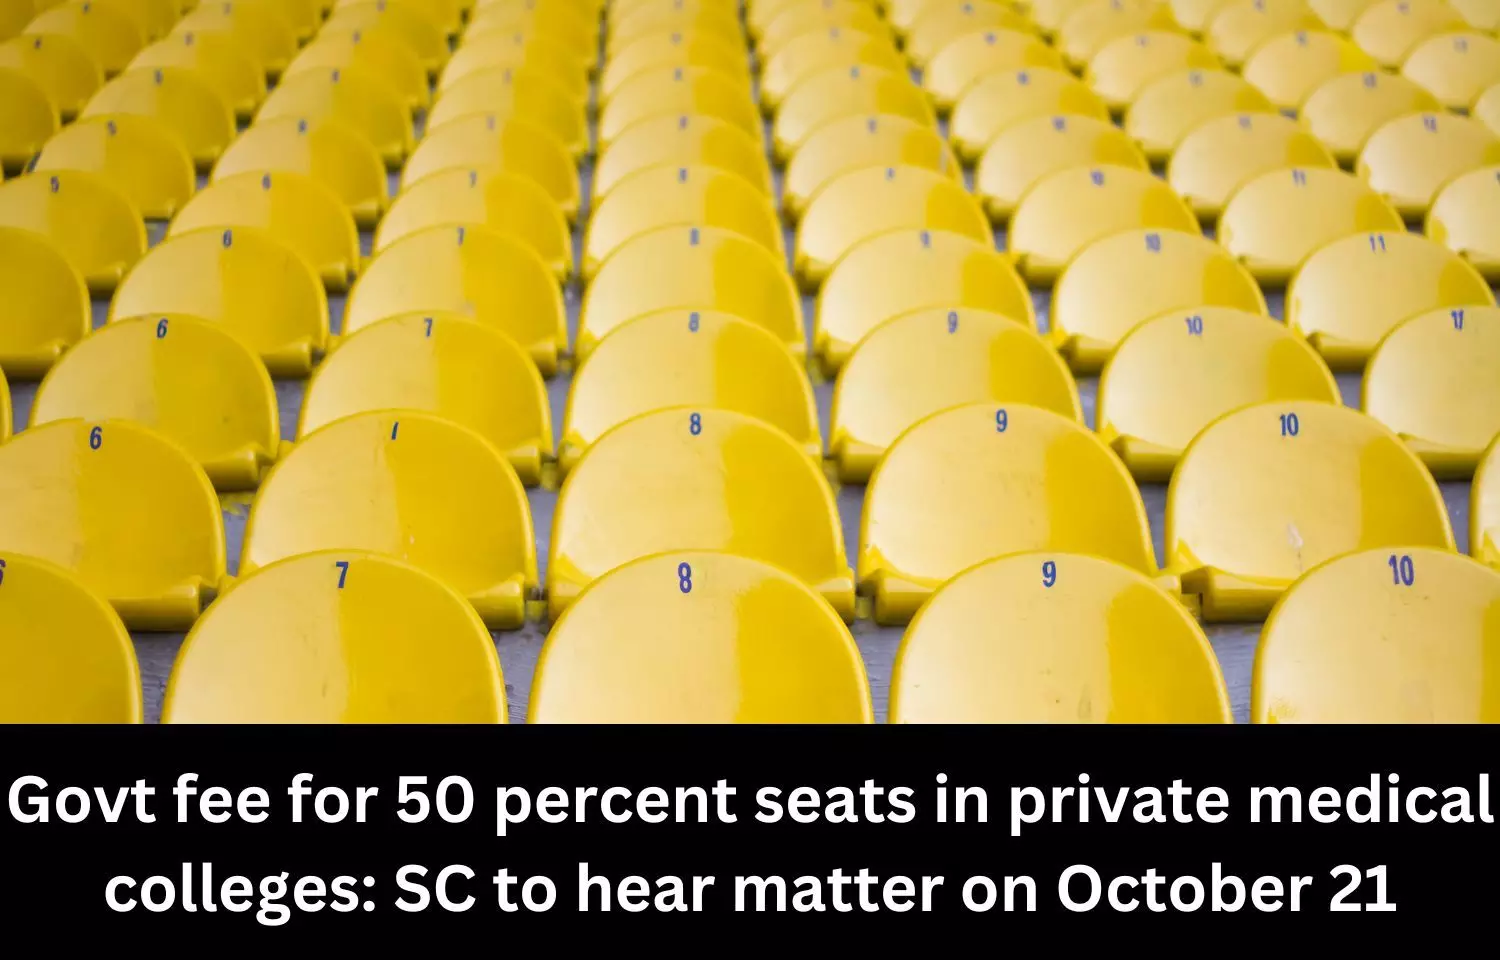 Govt fee for 50 percent seats in private medical colleges: SC to hear matter on October 21